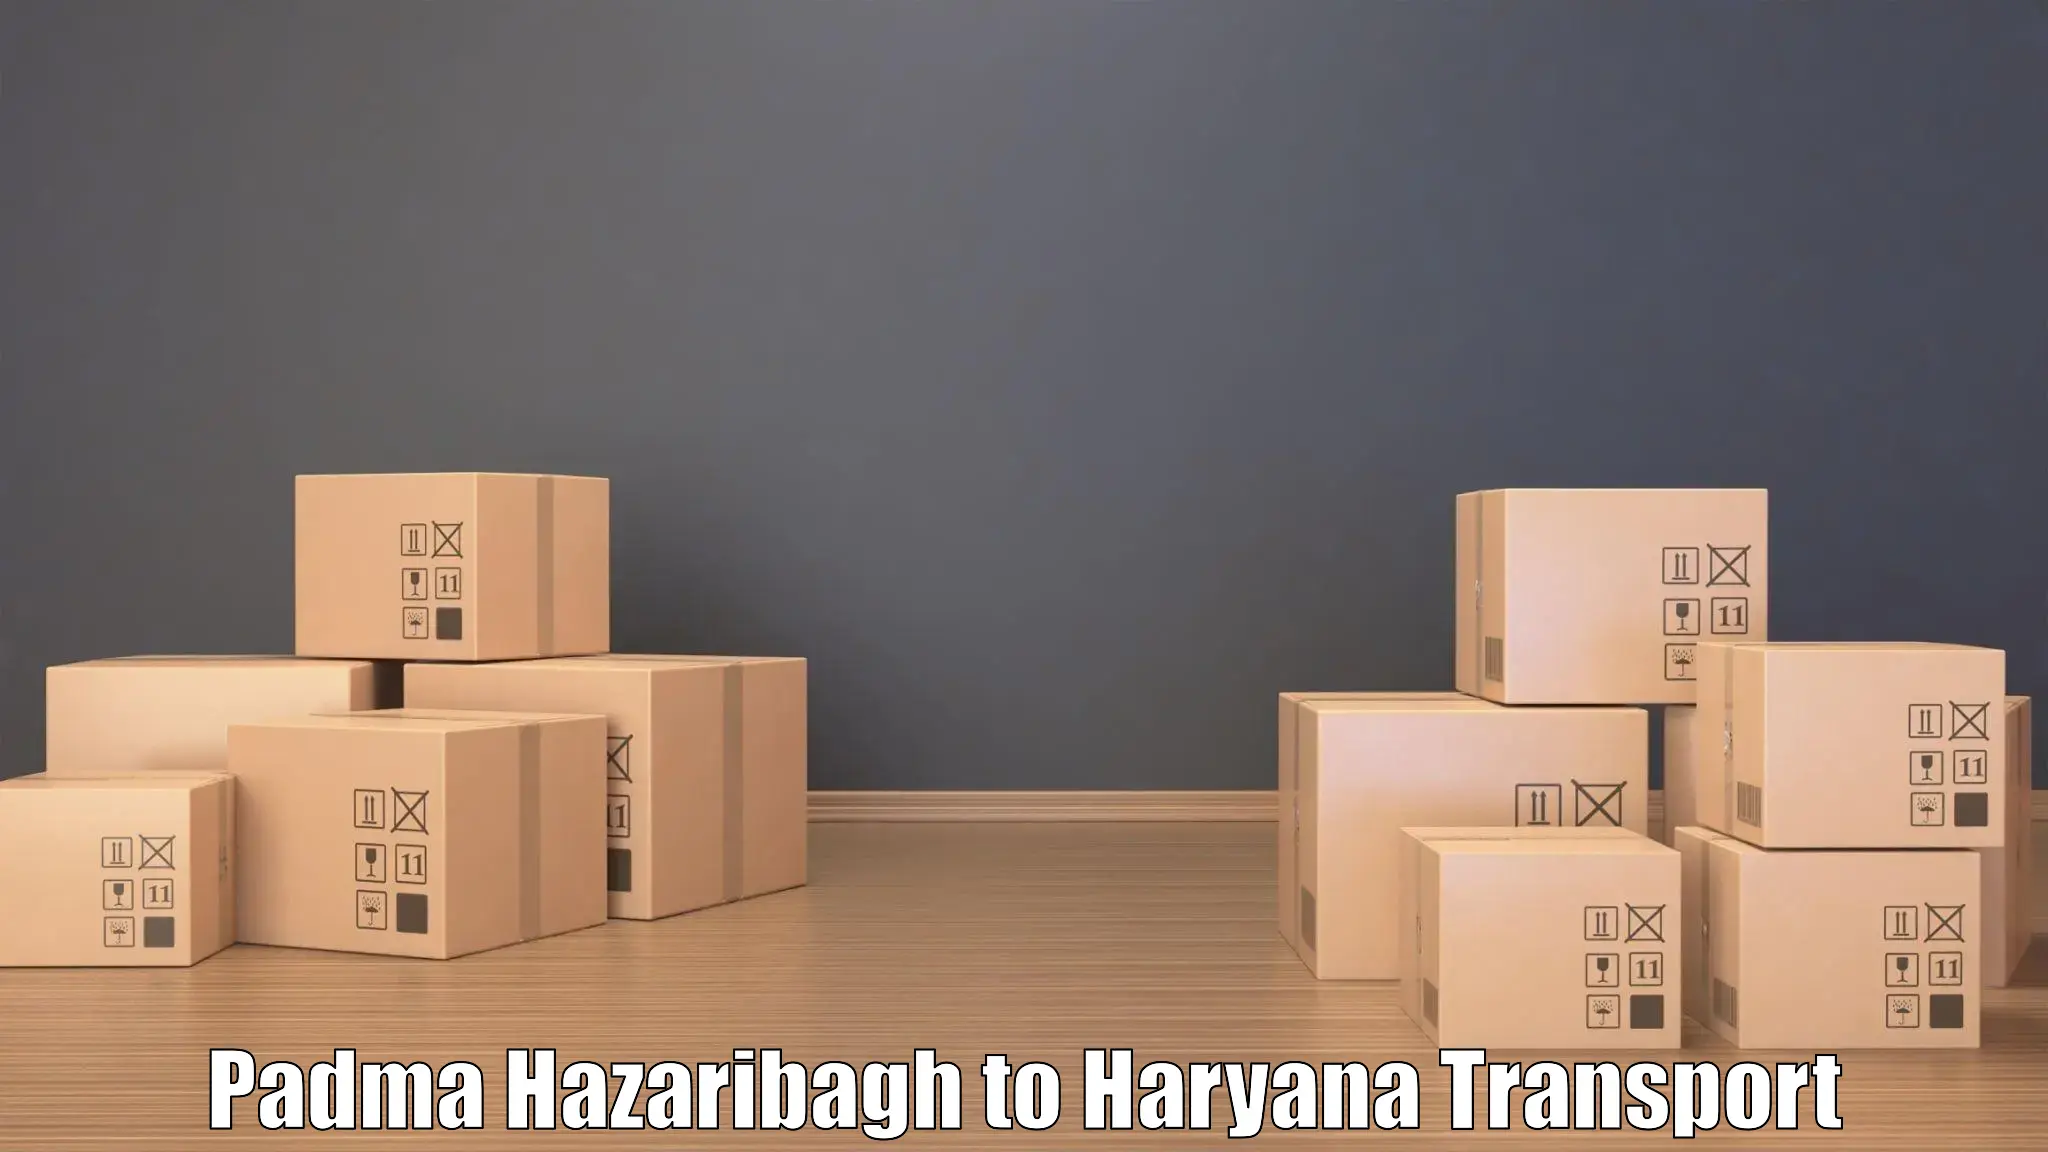 Road transport services in Padma Hazaribagh to Bhuna